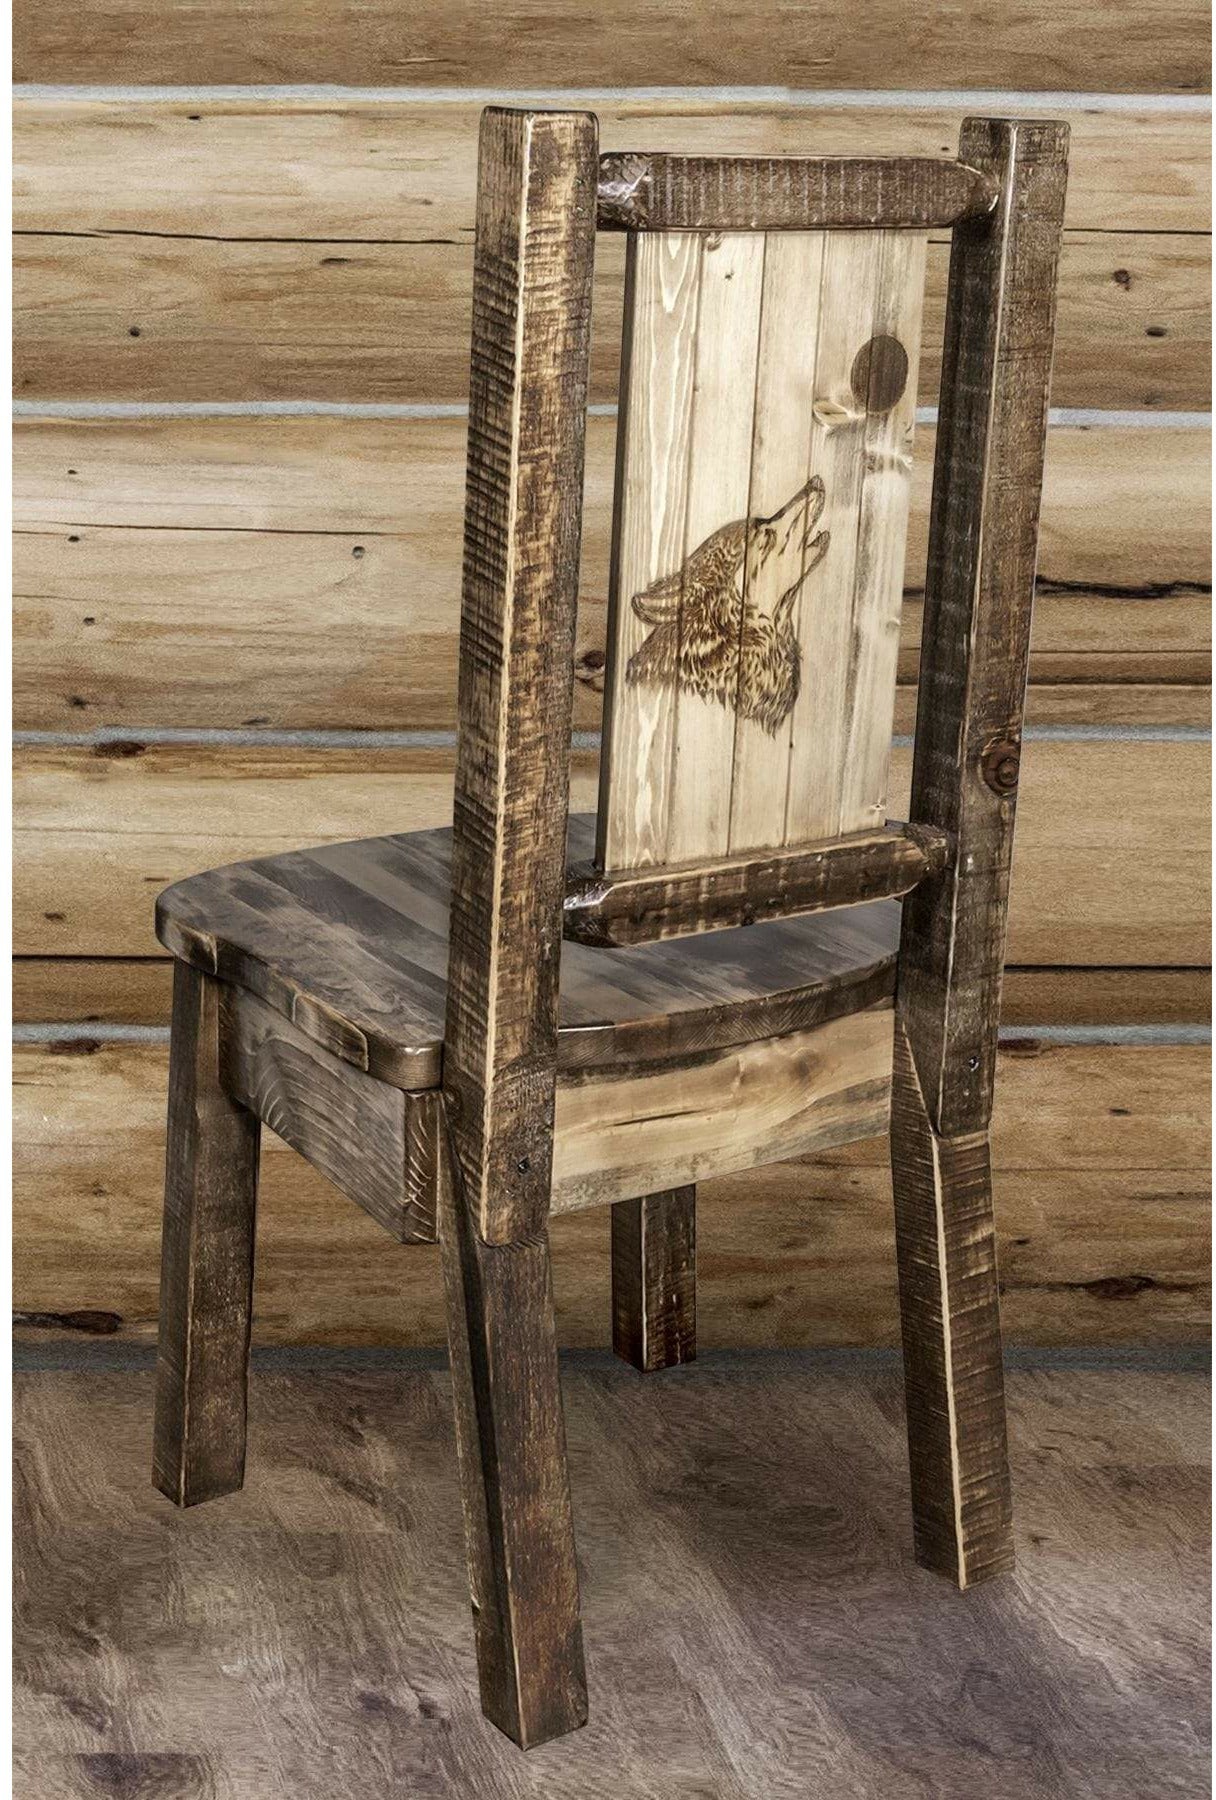 Montana Woodworks Homestead Collection Side Chair with Laser Engraved Design - Stain & Lacquer Finish-Rustic Furniture Marketplace